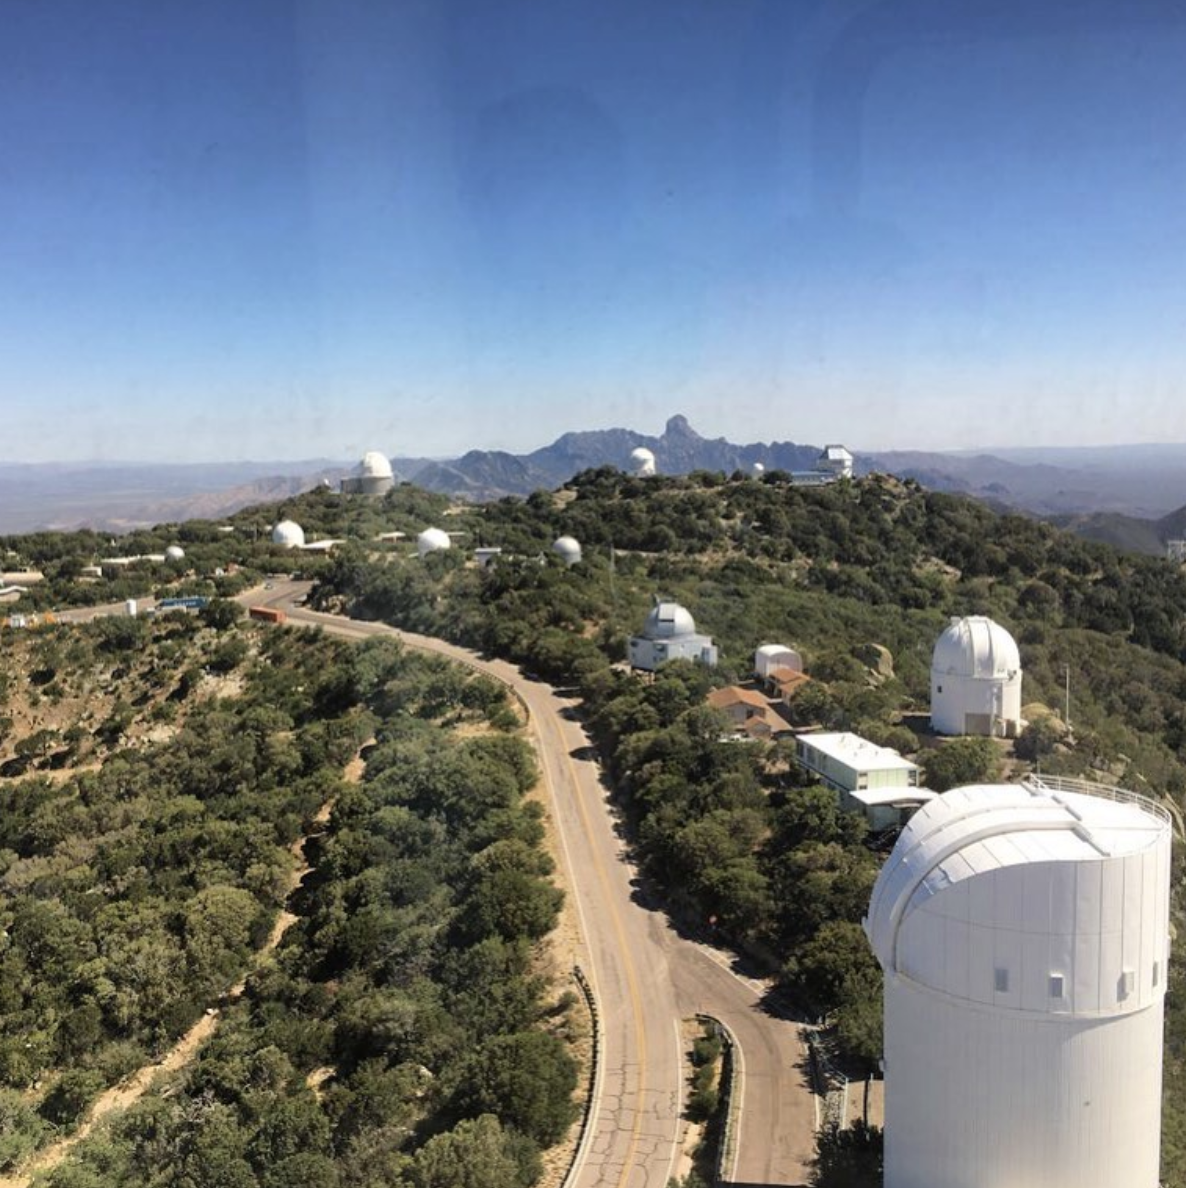 The story behind  #TheLastStargazers begins with my first observing run, at Kitt Peak with  @MassiveStarGuy back in 2004.At the time I was a 19yo physics major and aspiring astronomer but even as we drove to the mountain together I really didn't know much about what lay ahead...